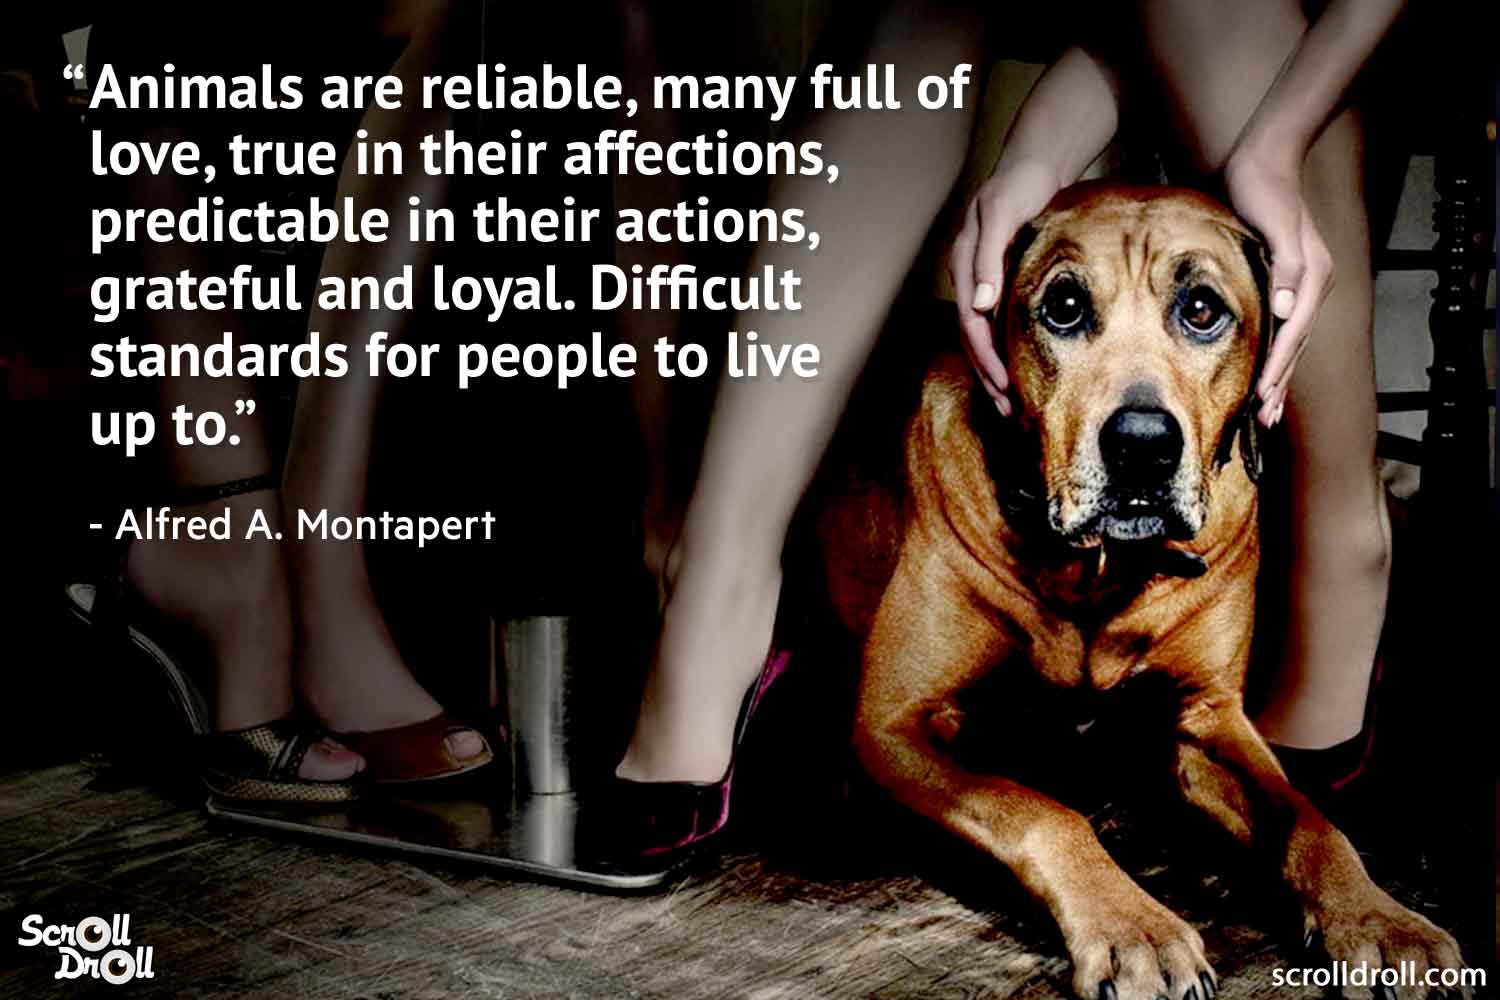 quotes-on-animals-by-famous-people-10 - Pop Culture, Entertainment, Humor,  Travel & More